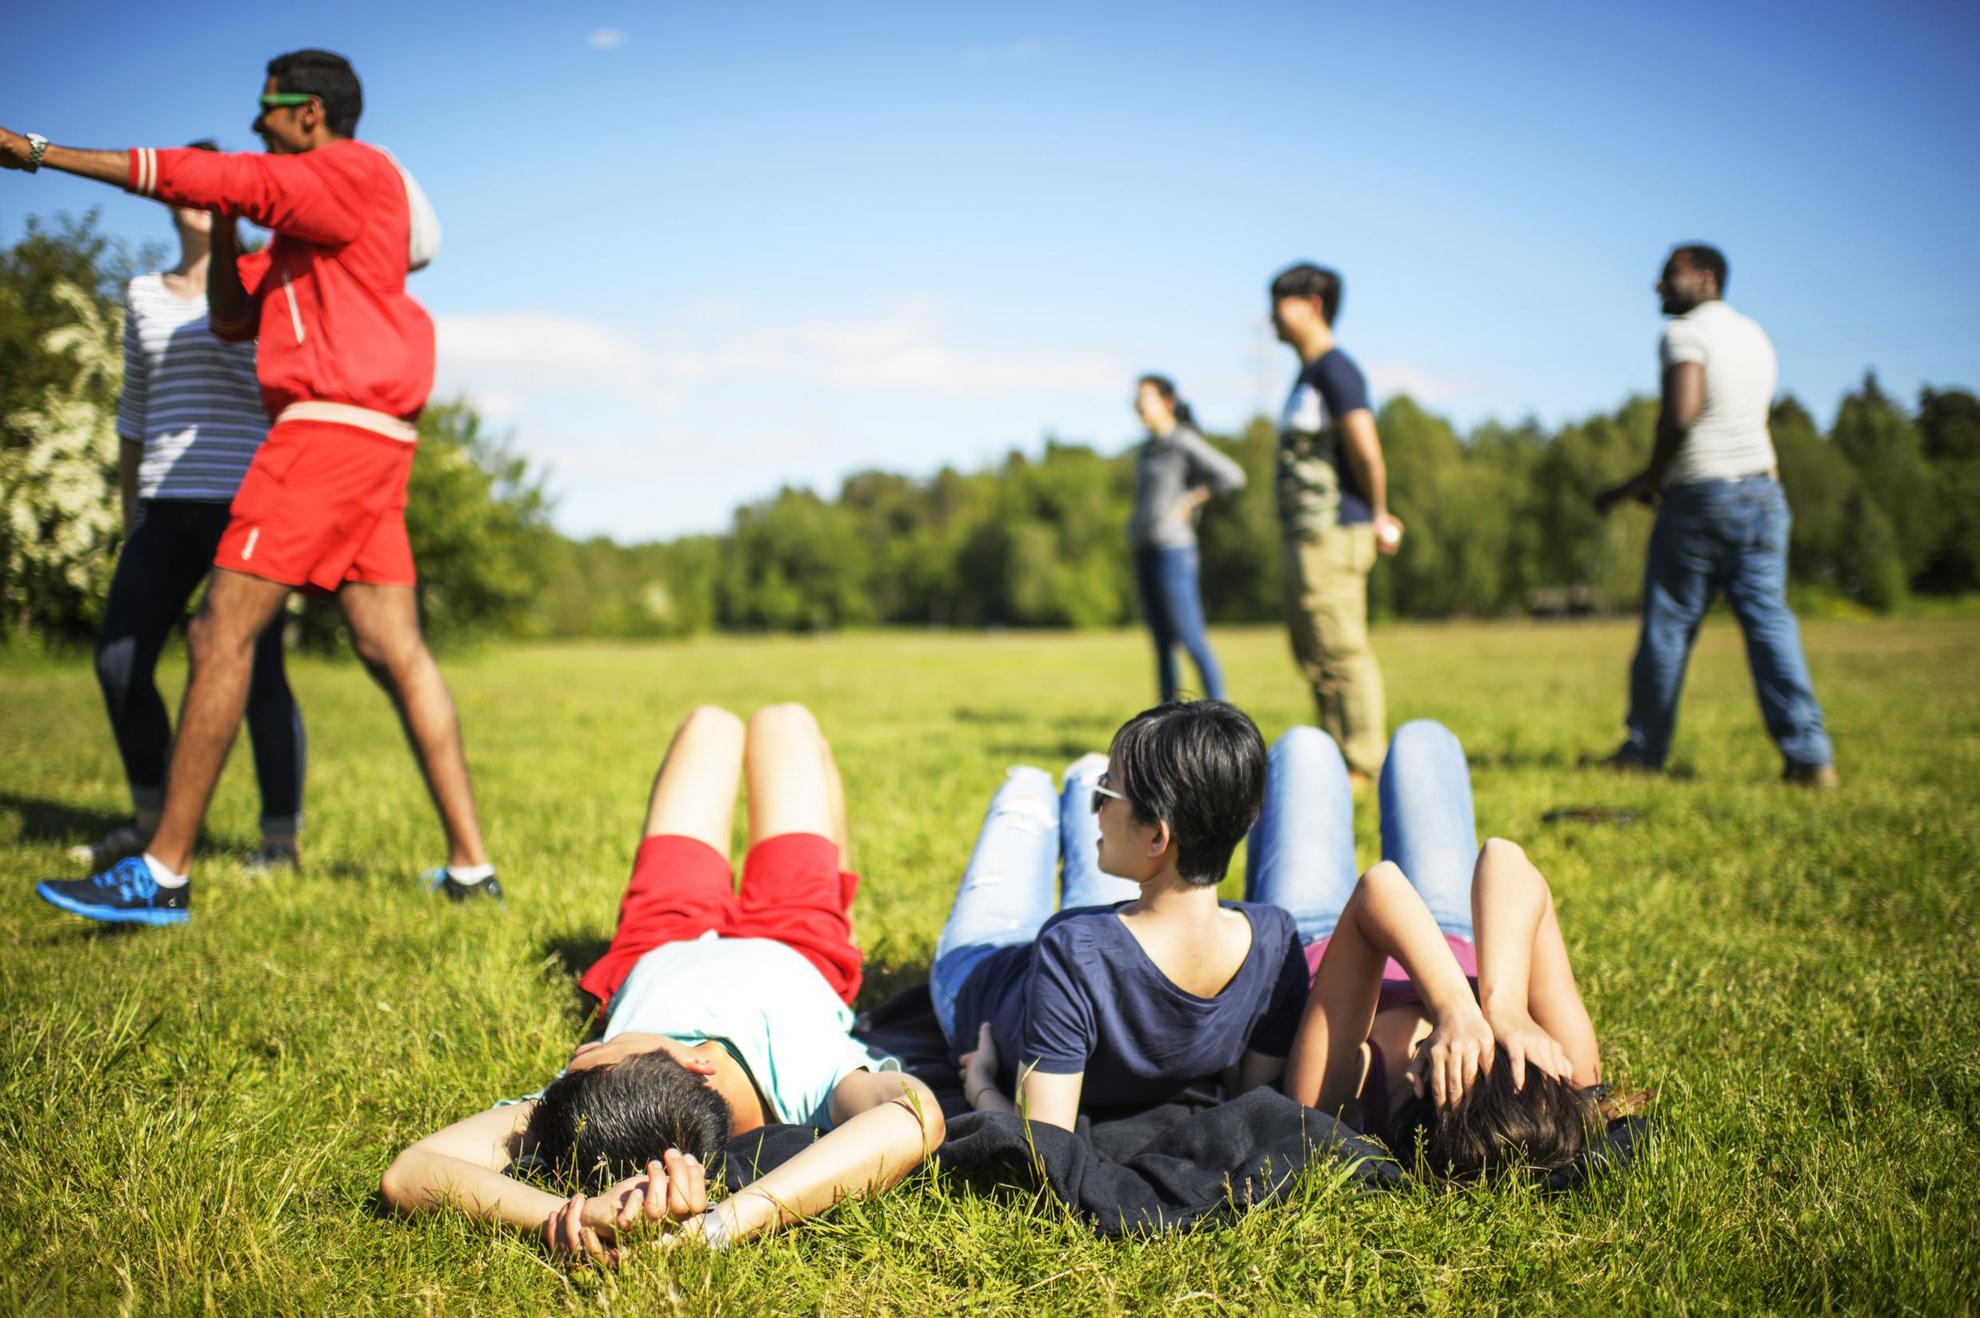 A group of young adults on the grass in a park, some lying down, others standing.